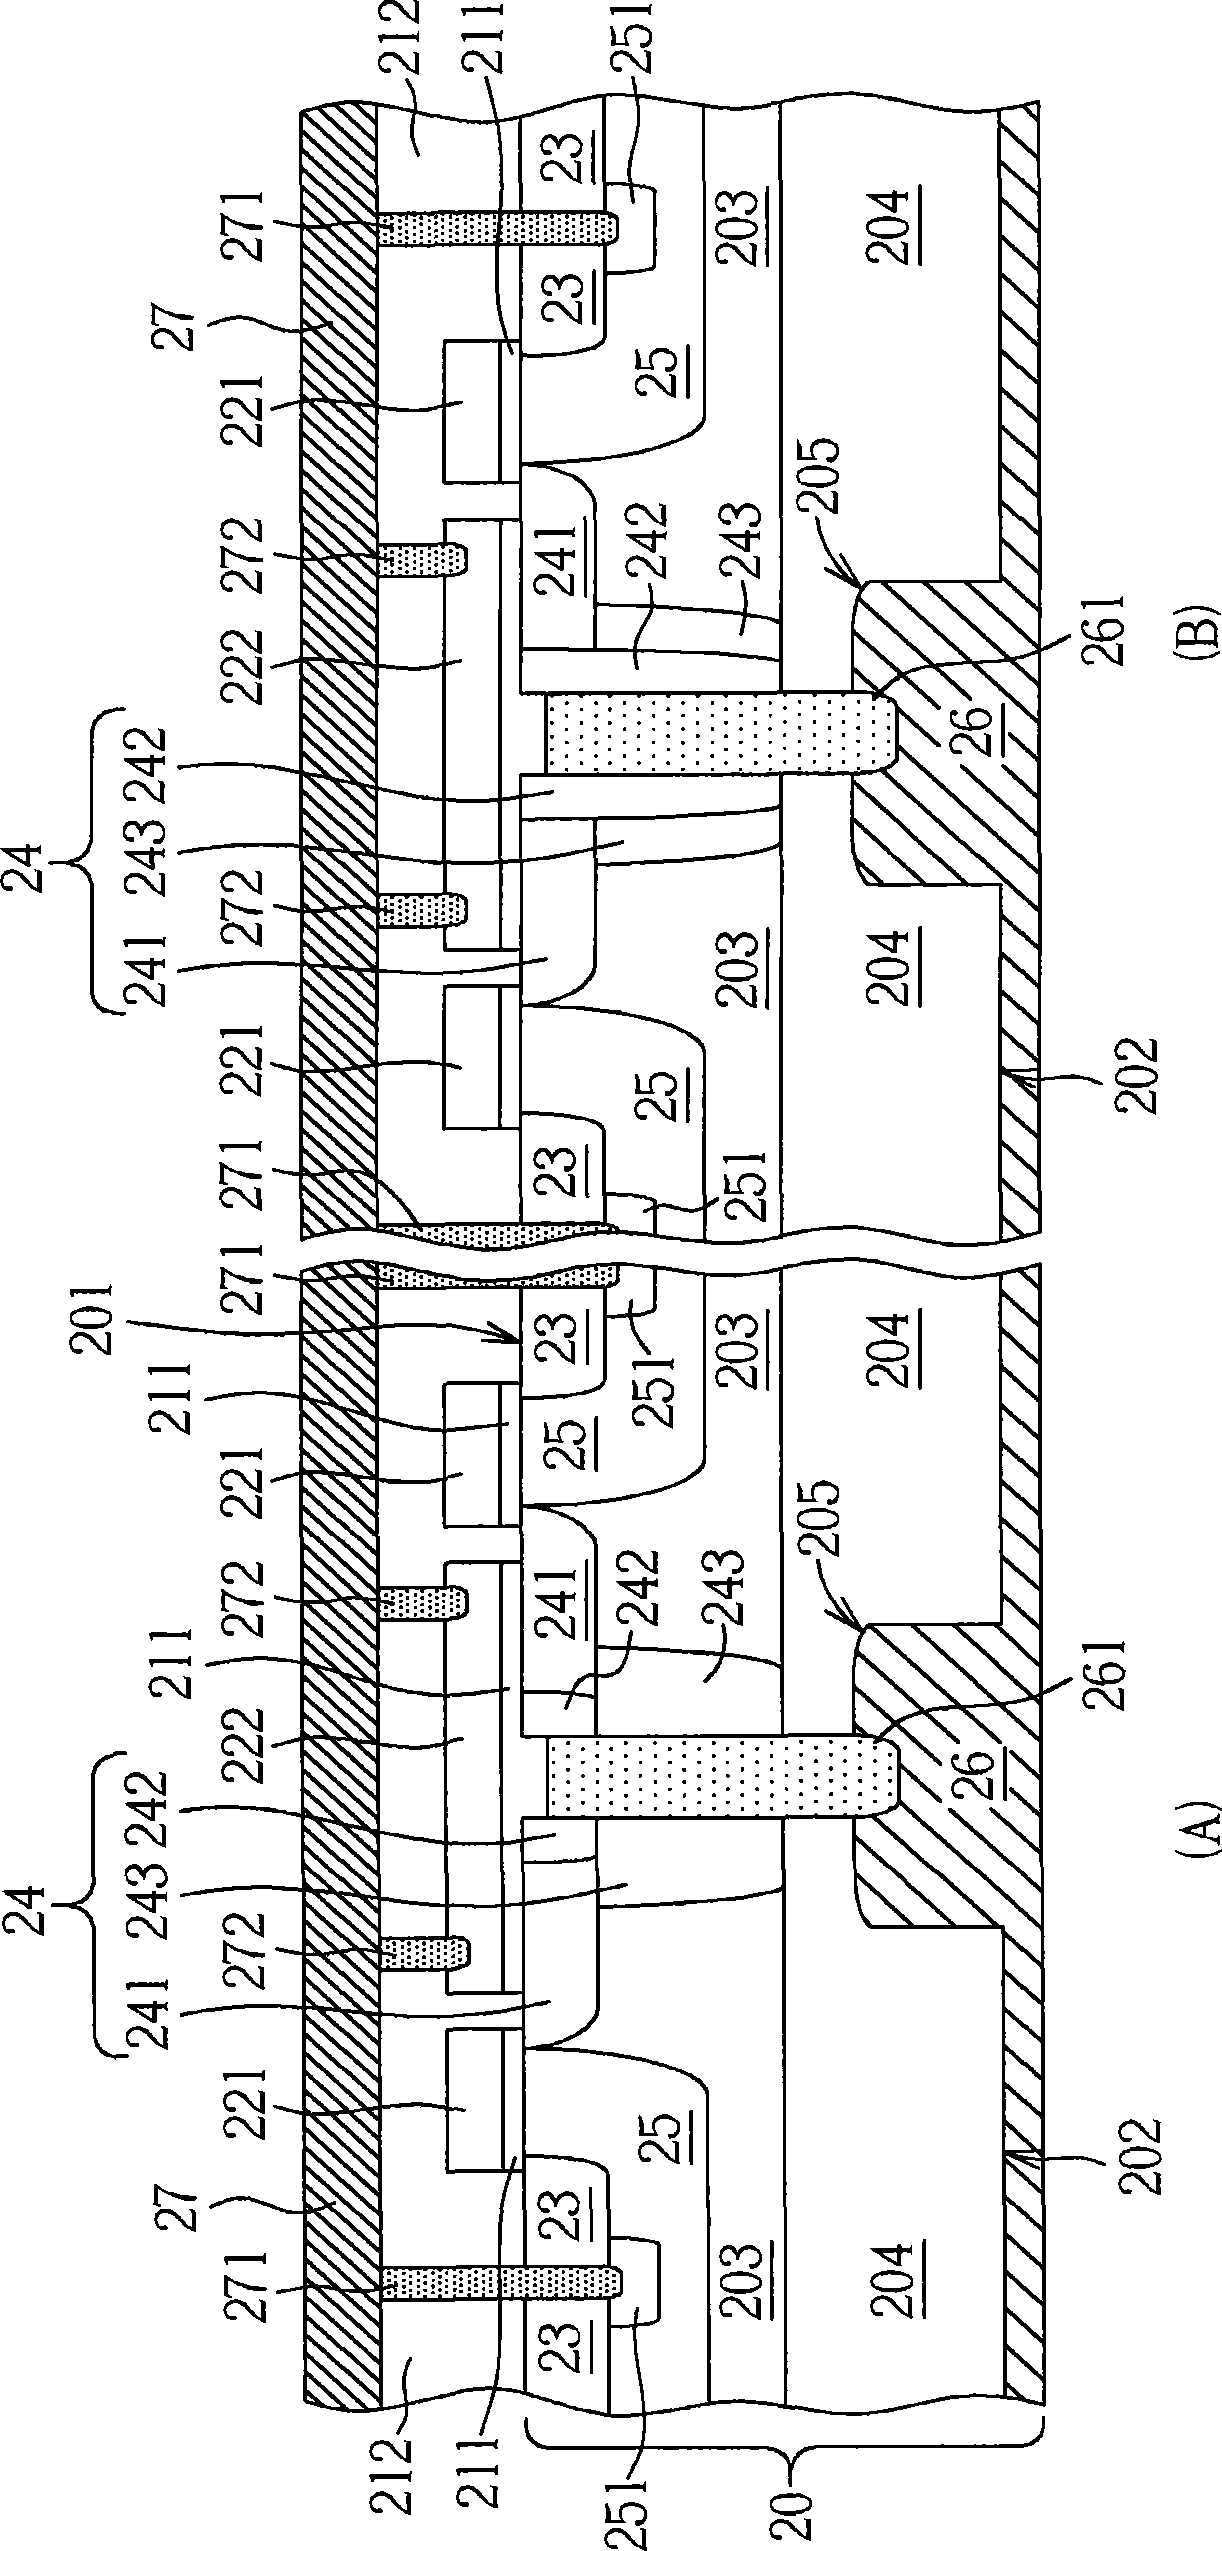 Lateral diffusion metal oxide semiconductor assembly